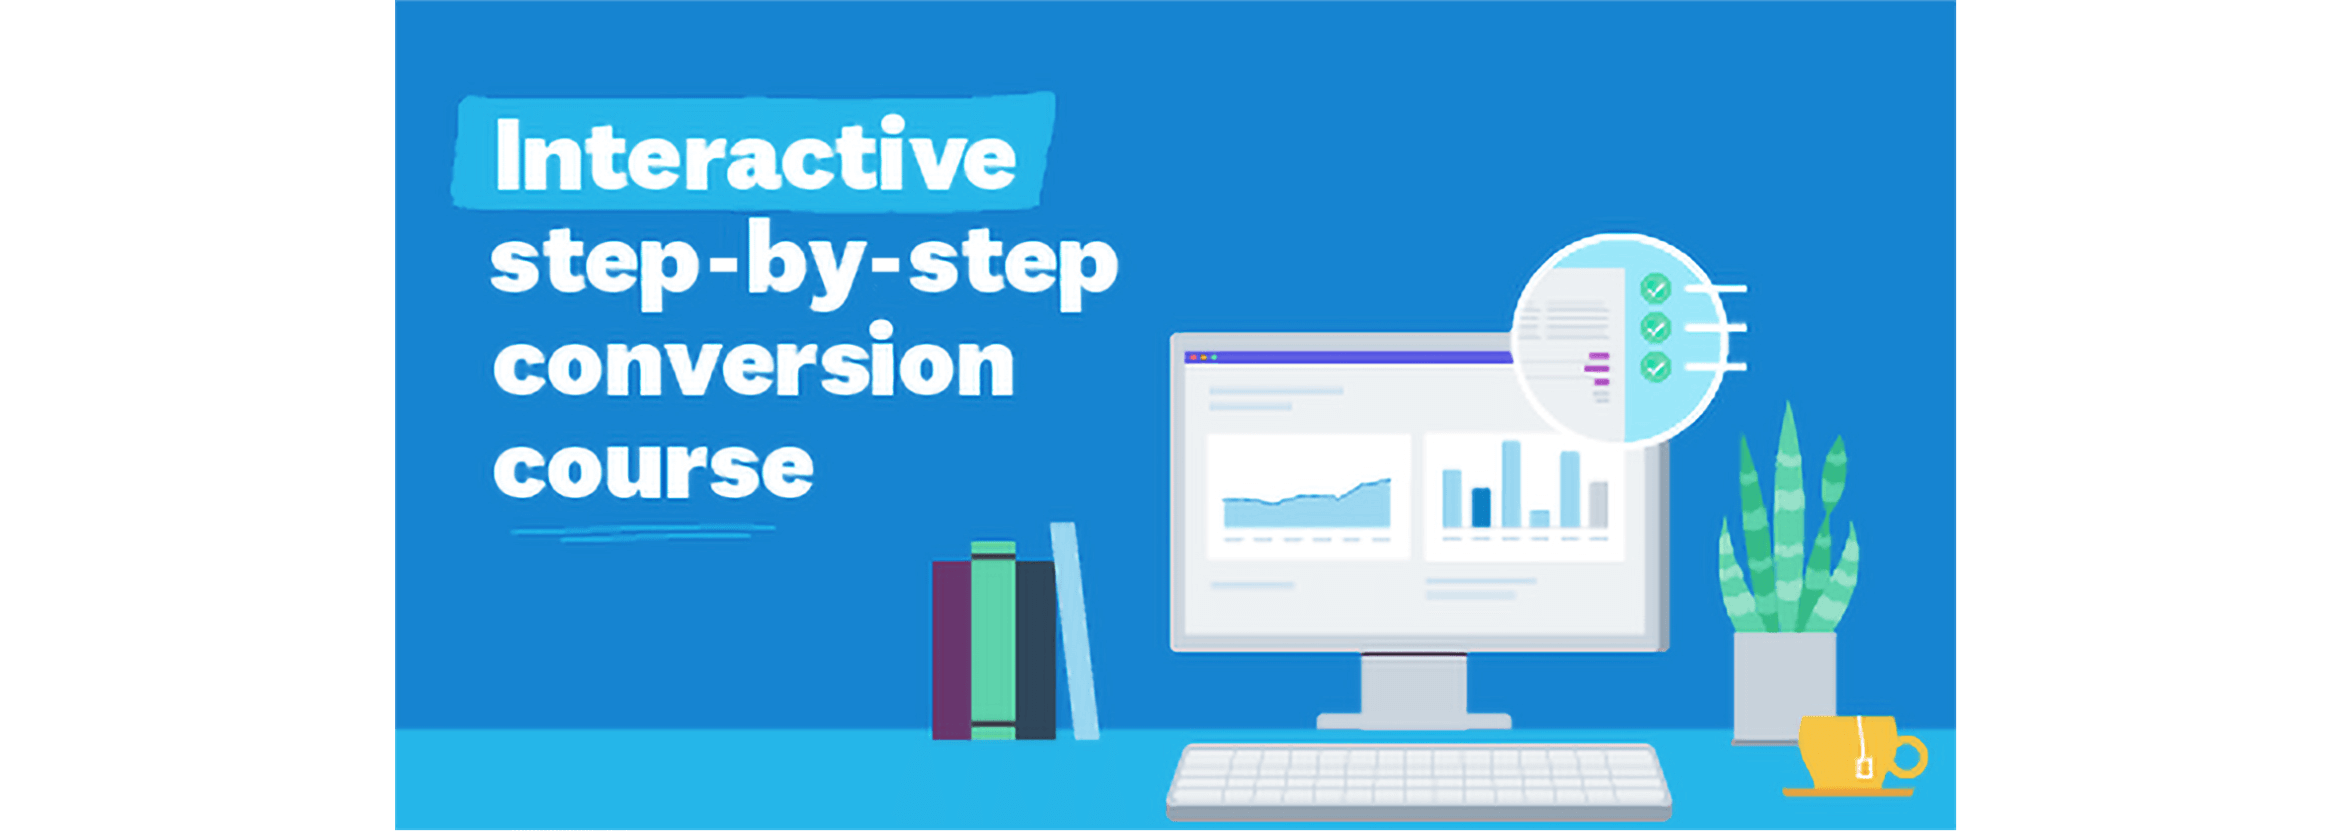 The step-by-step conversion course runs on a laptop.